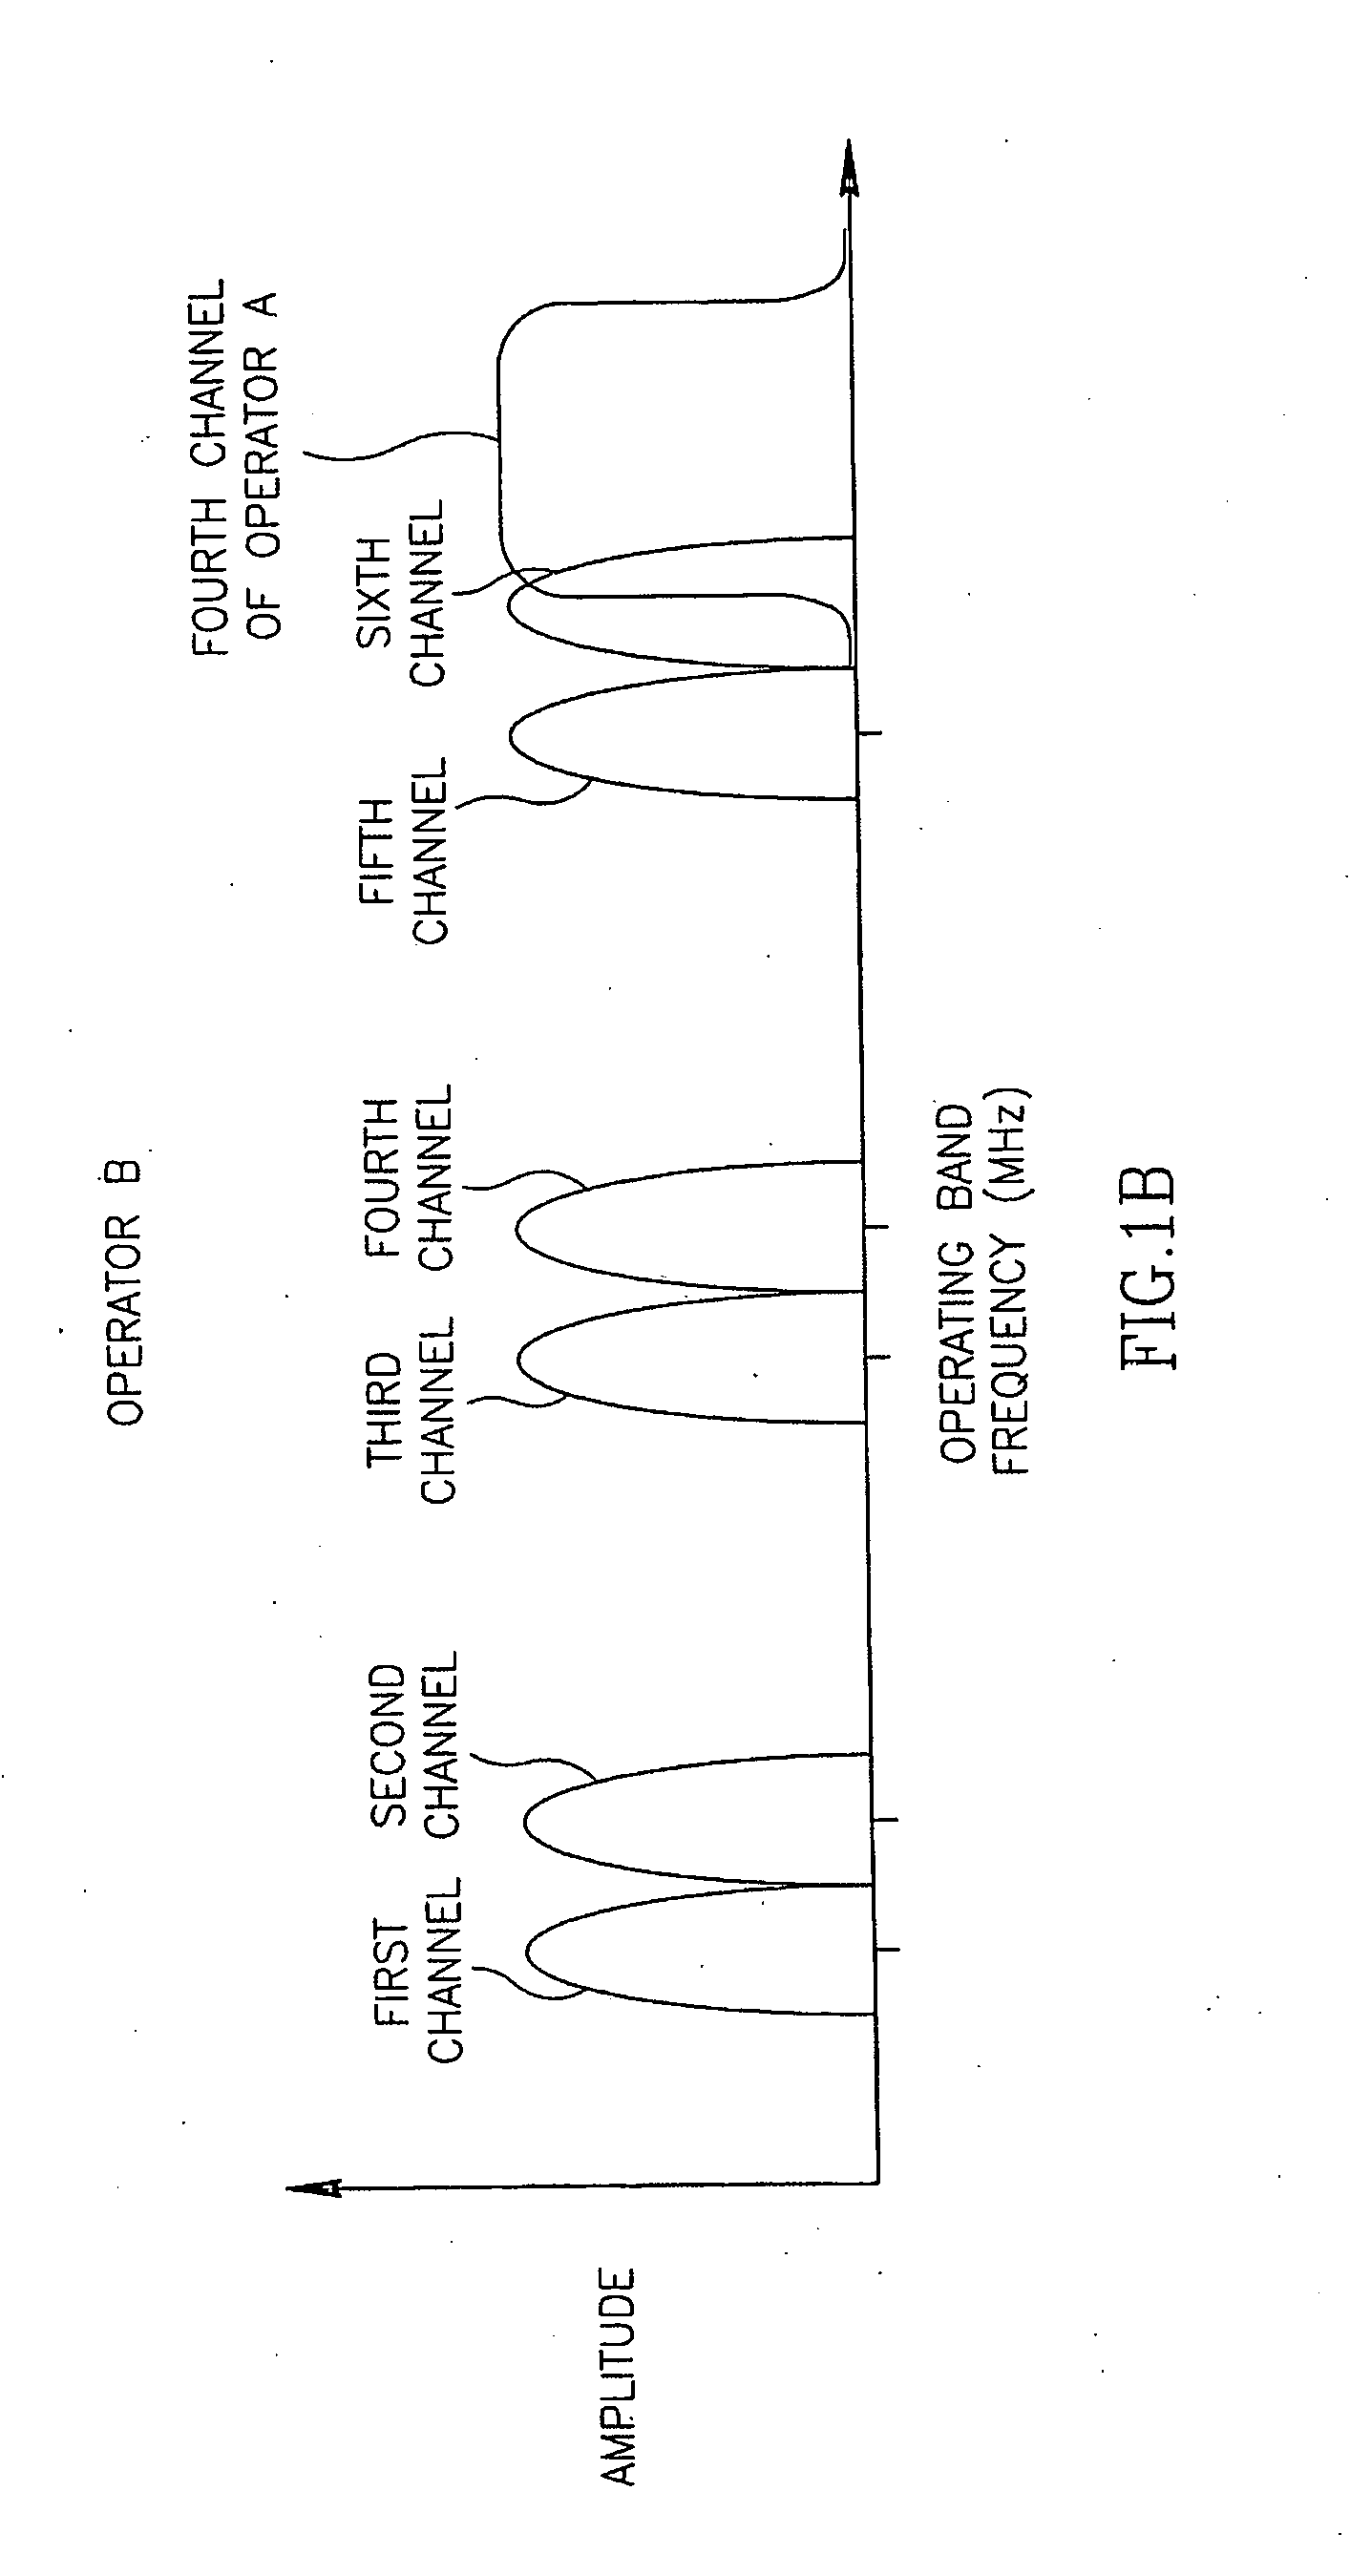 System and method for excluding narrow band noise from a communication channel